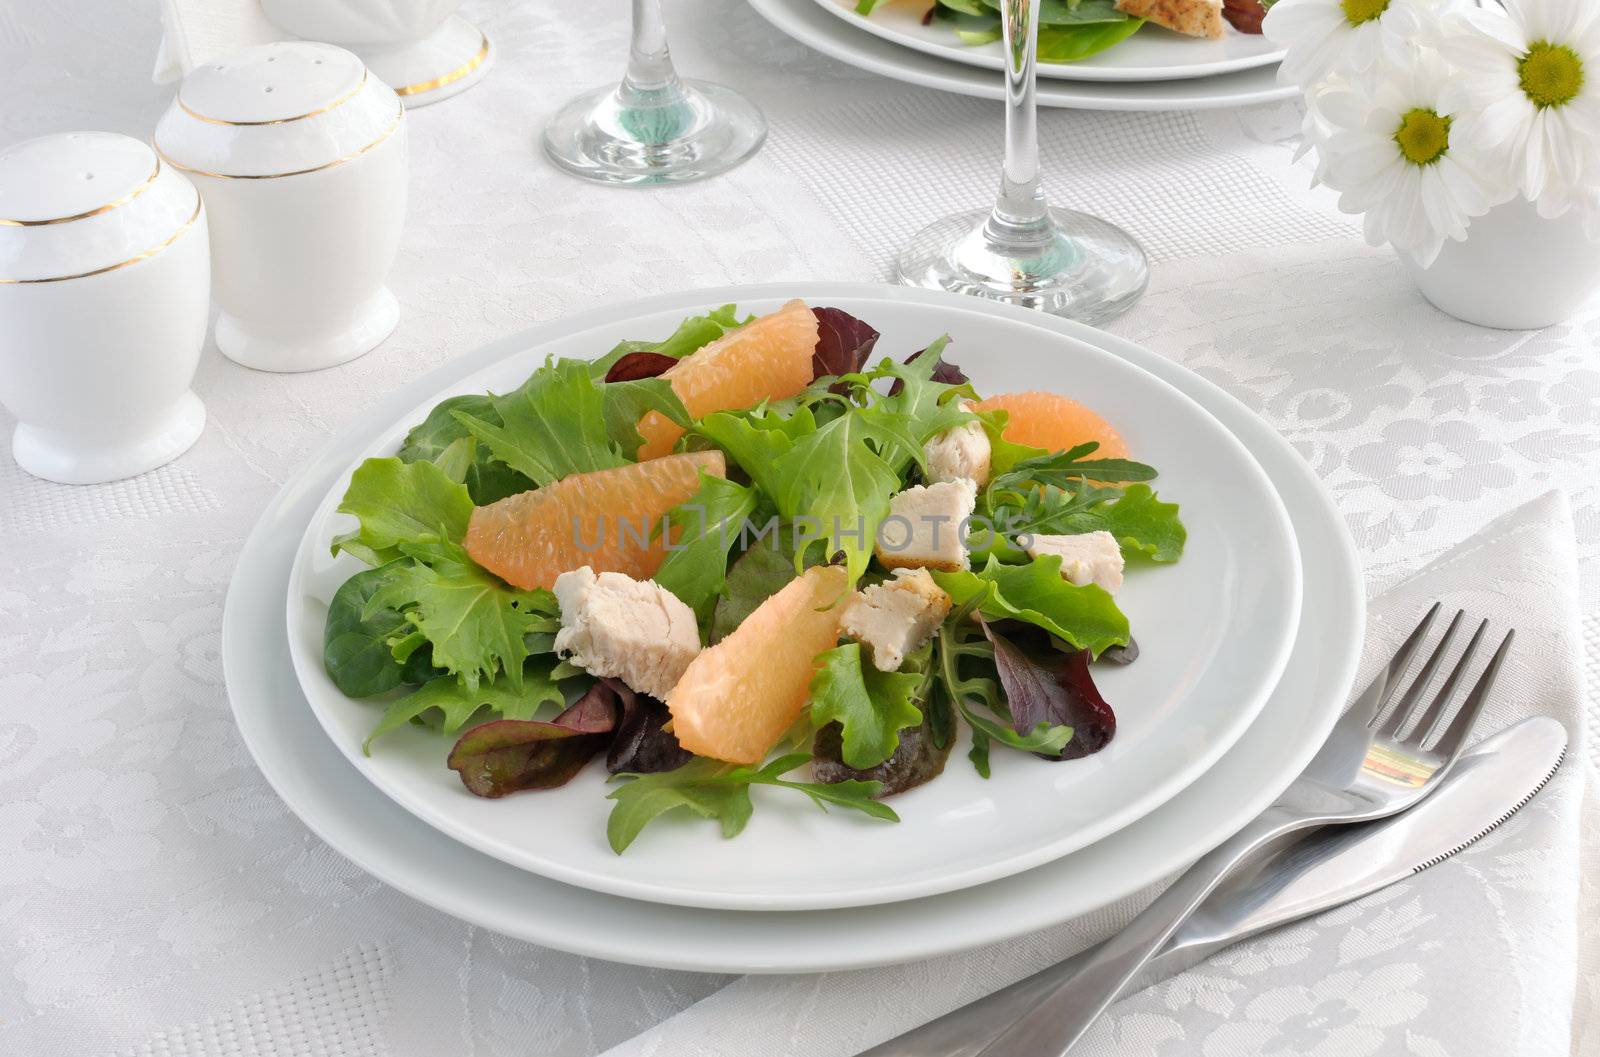 Chicken salad with grapefruit and a mixture of fresh salads